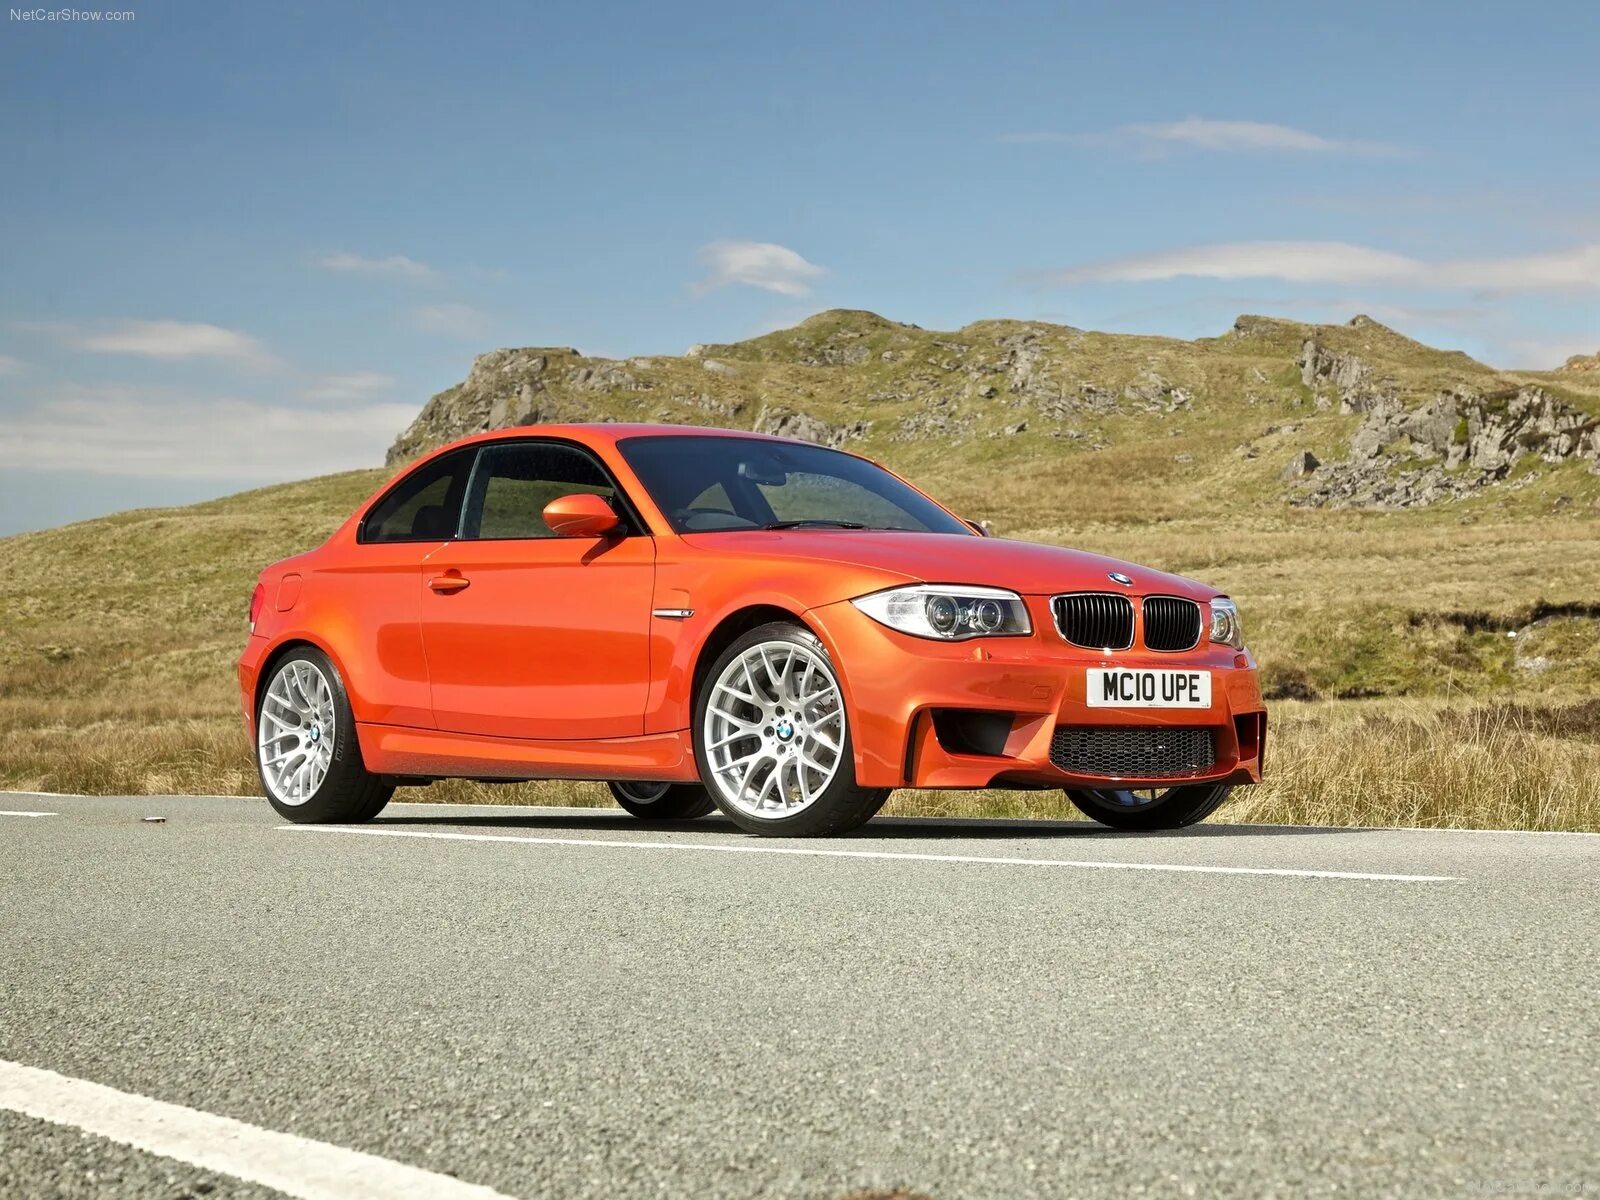 Bmw m coupe. BMW m1. BMW 1m Coupe. BMW 1 Series m. BMW 1 Series m Coupe.